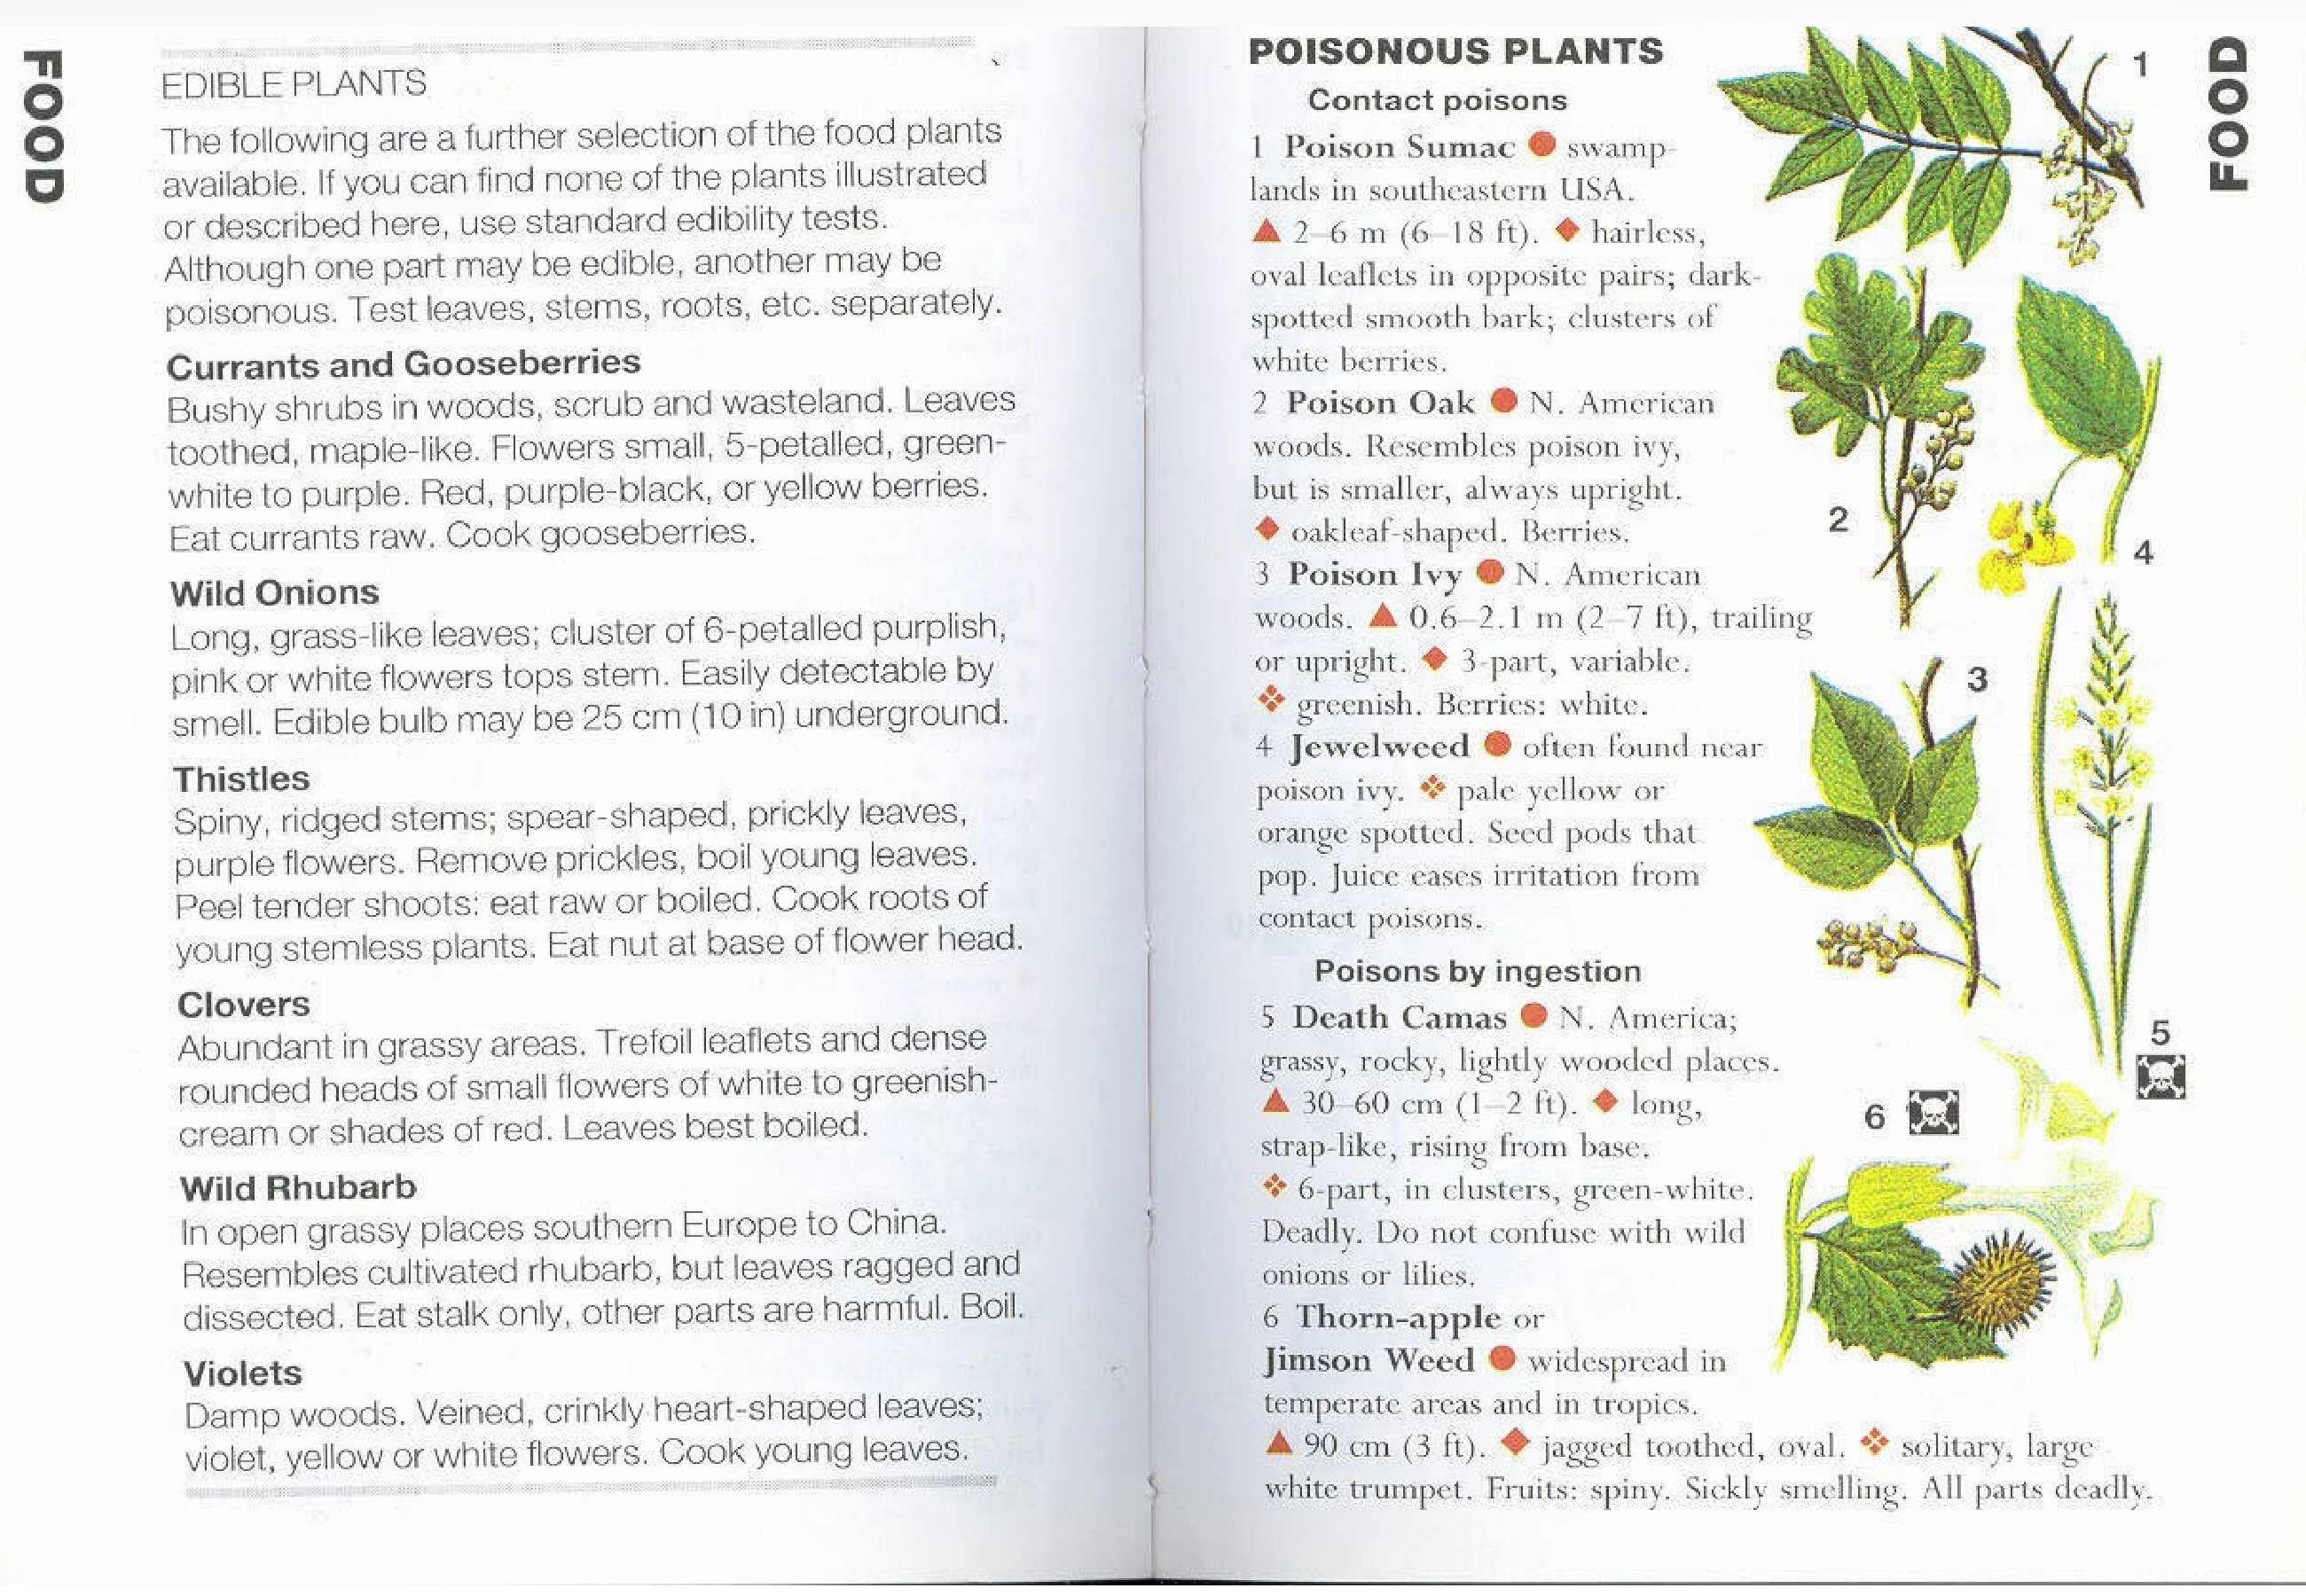 Some poisonous plants are easy to mistake for edible species. Do not take risks: identify carefully. Learn to recognise the following in addition to those illustrated: The ButterCups, Lupins, Vetches […]